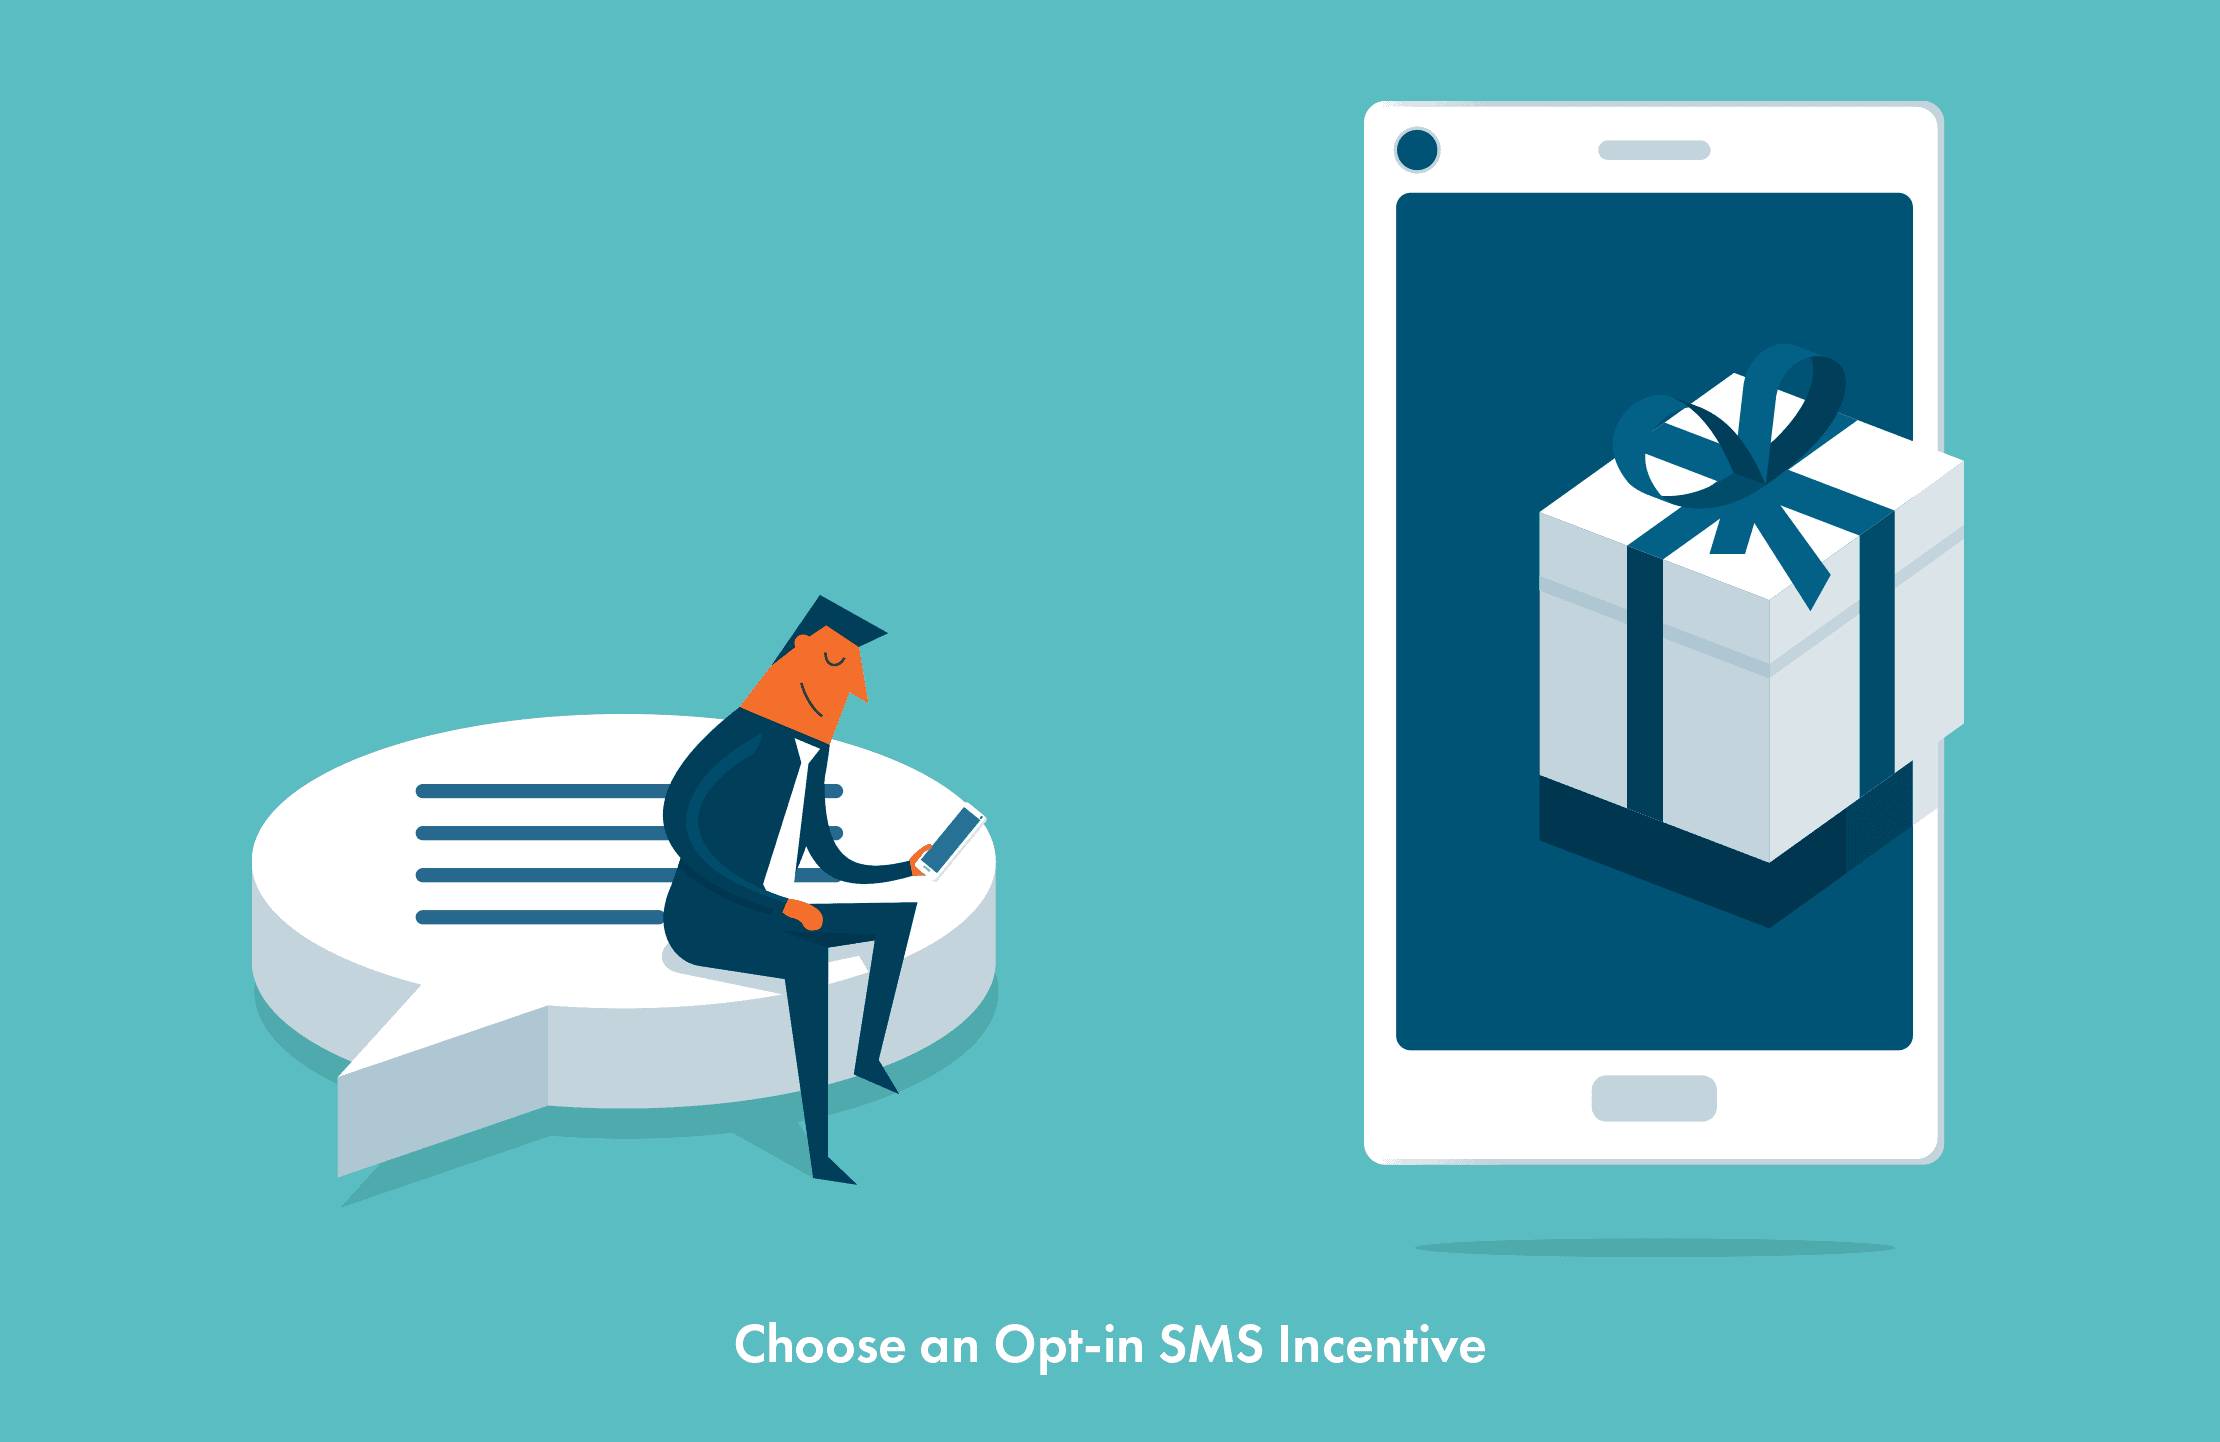 Election SMS Fundraising_Choose an Opt-in SMS Incentive